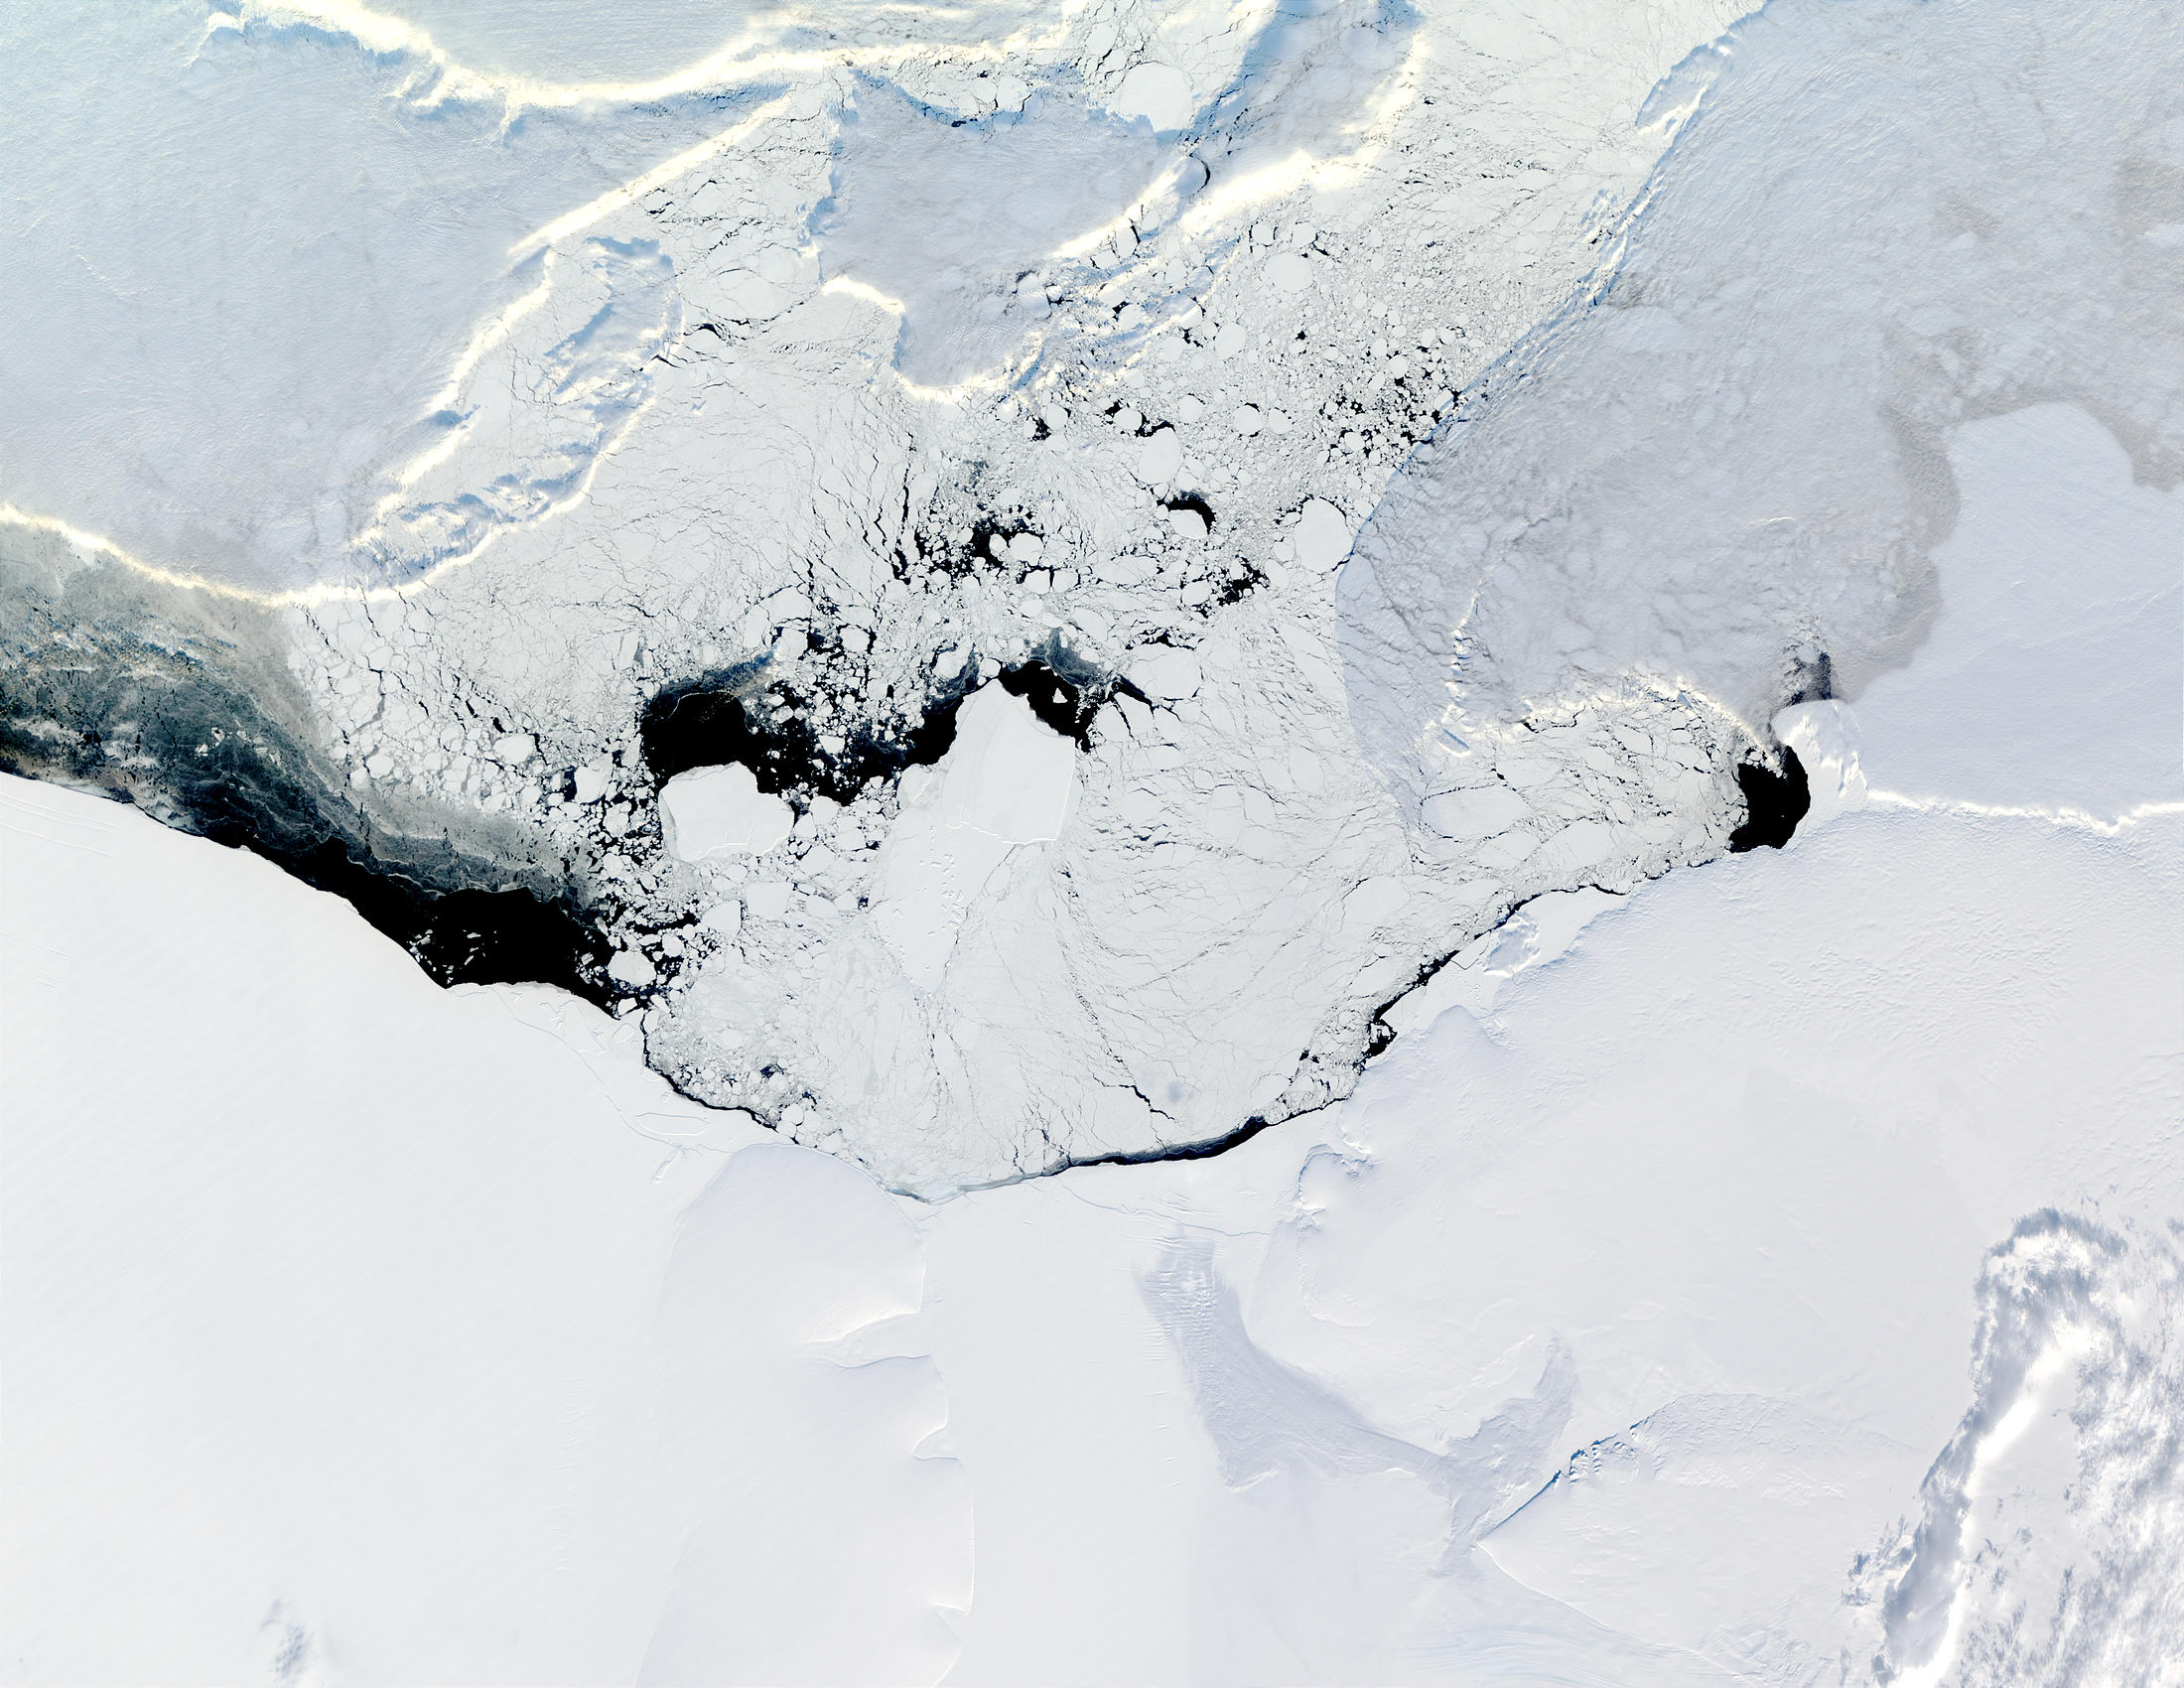 Ronne Ice Shelf and Weddell Sea, Antarctica - related image preview